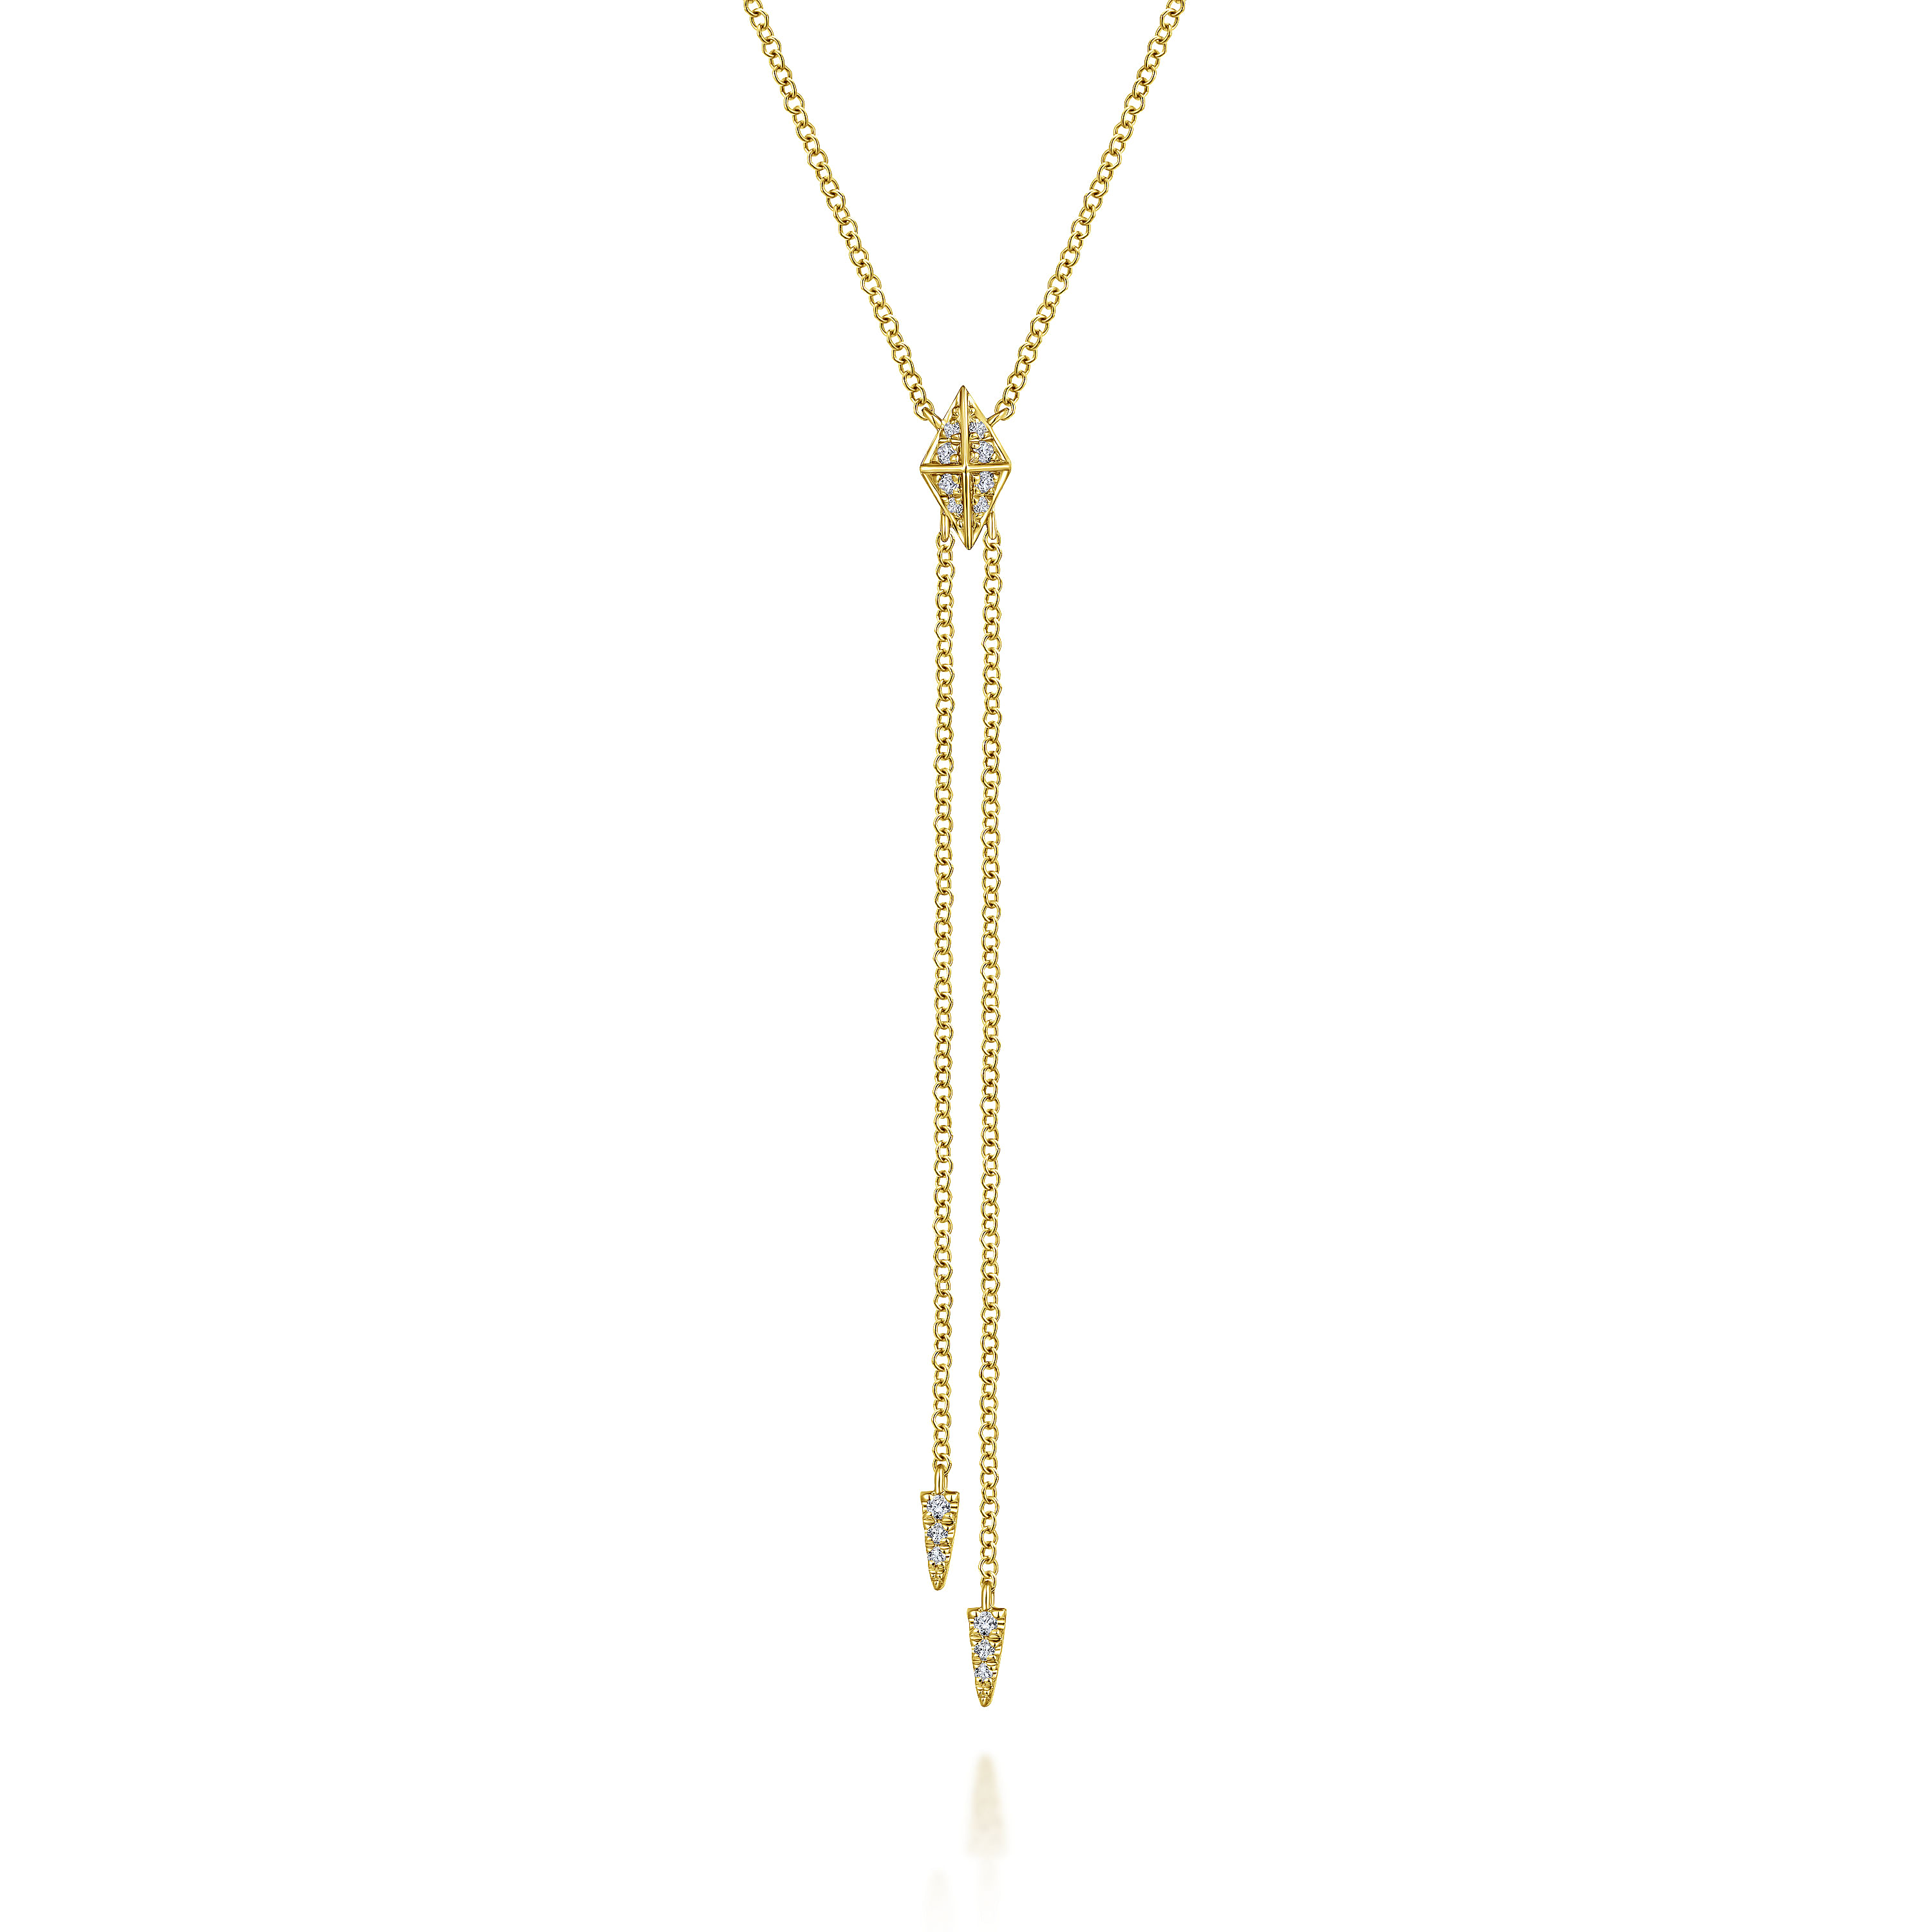 14K Yellow Gold Diamond Pyramid Y Knot Necklace